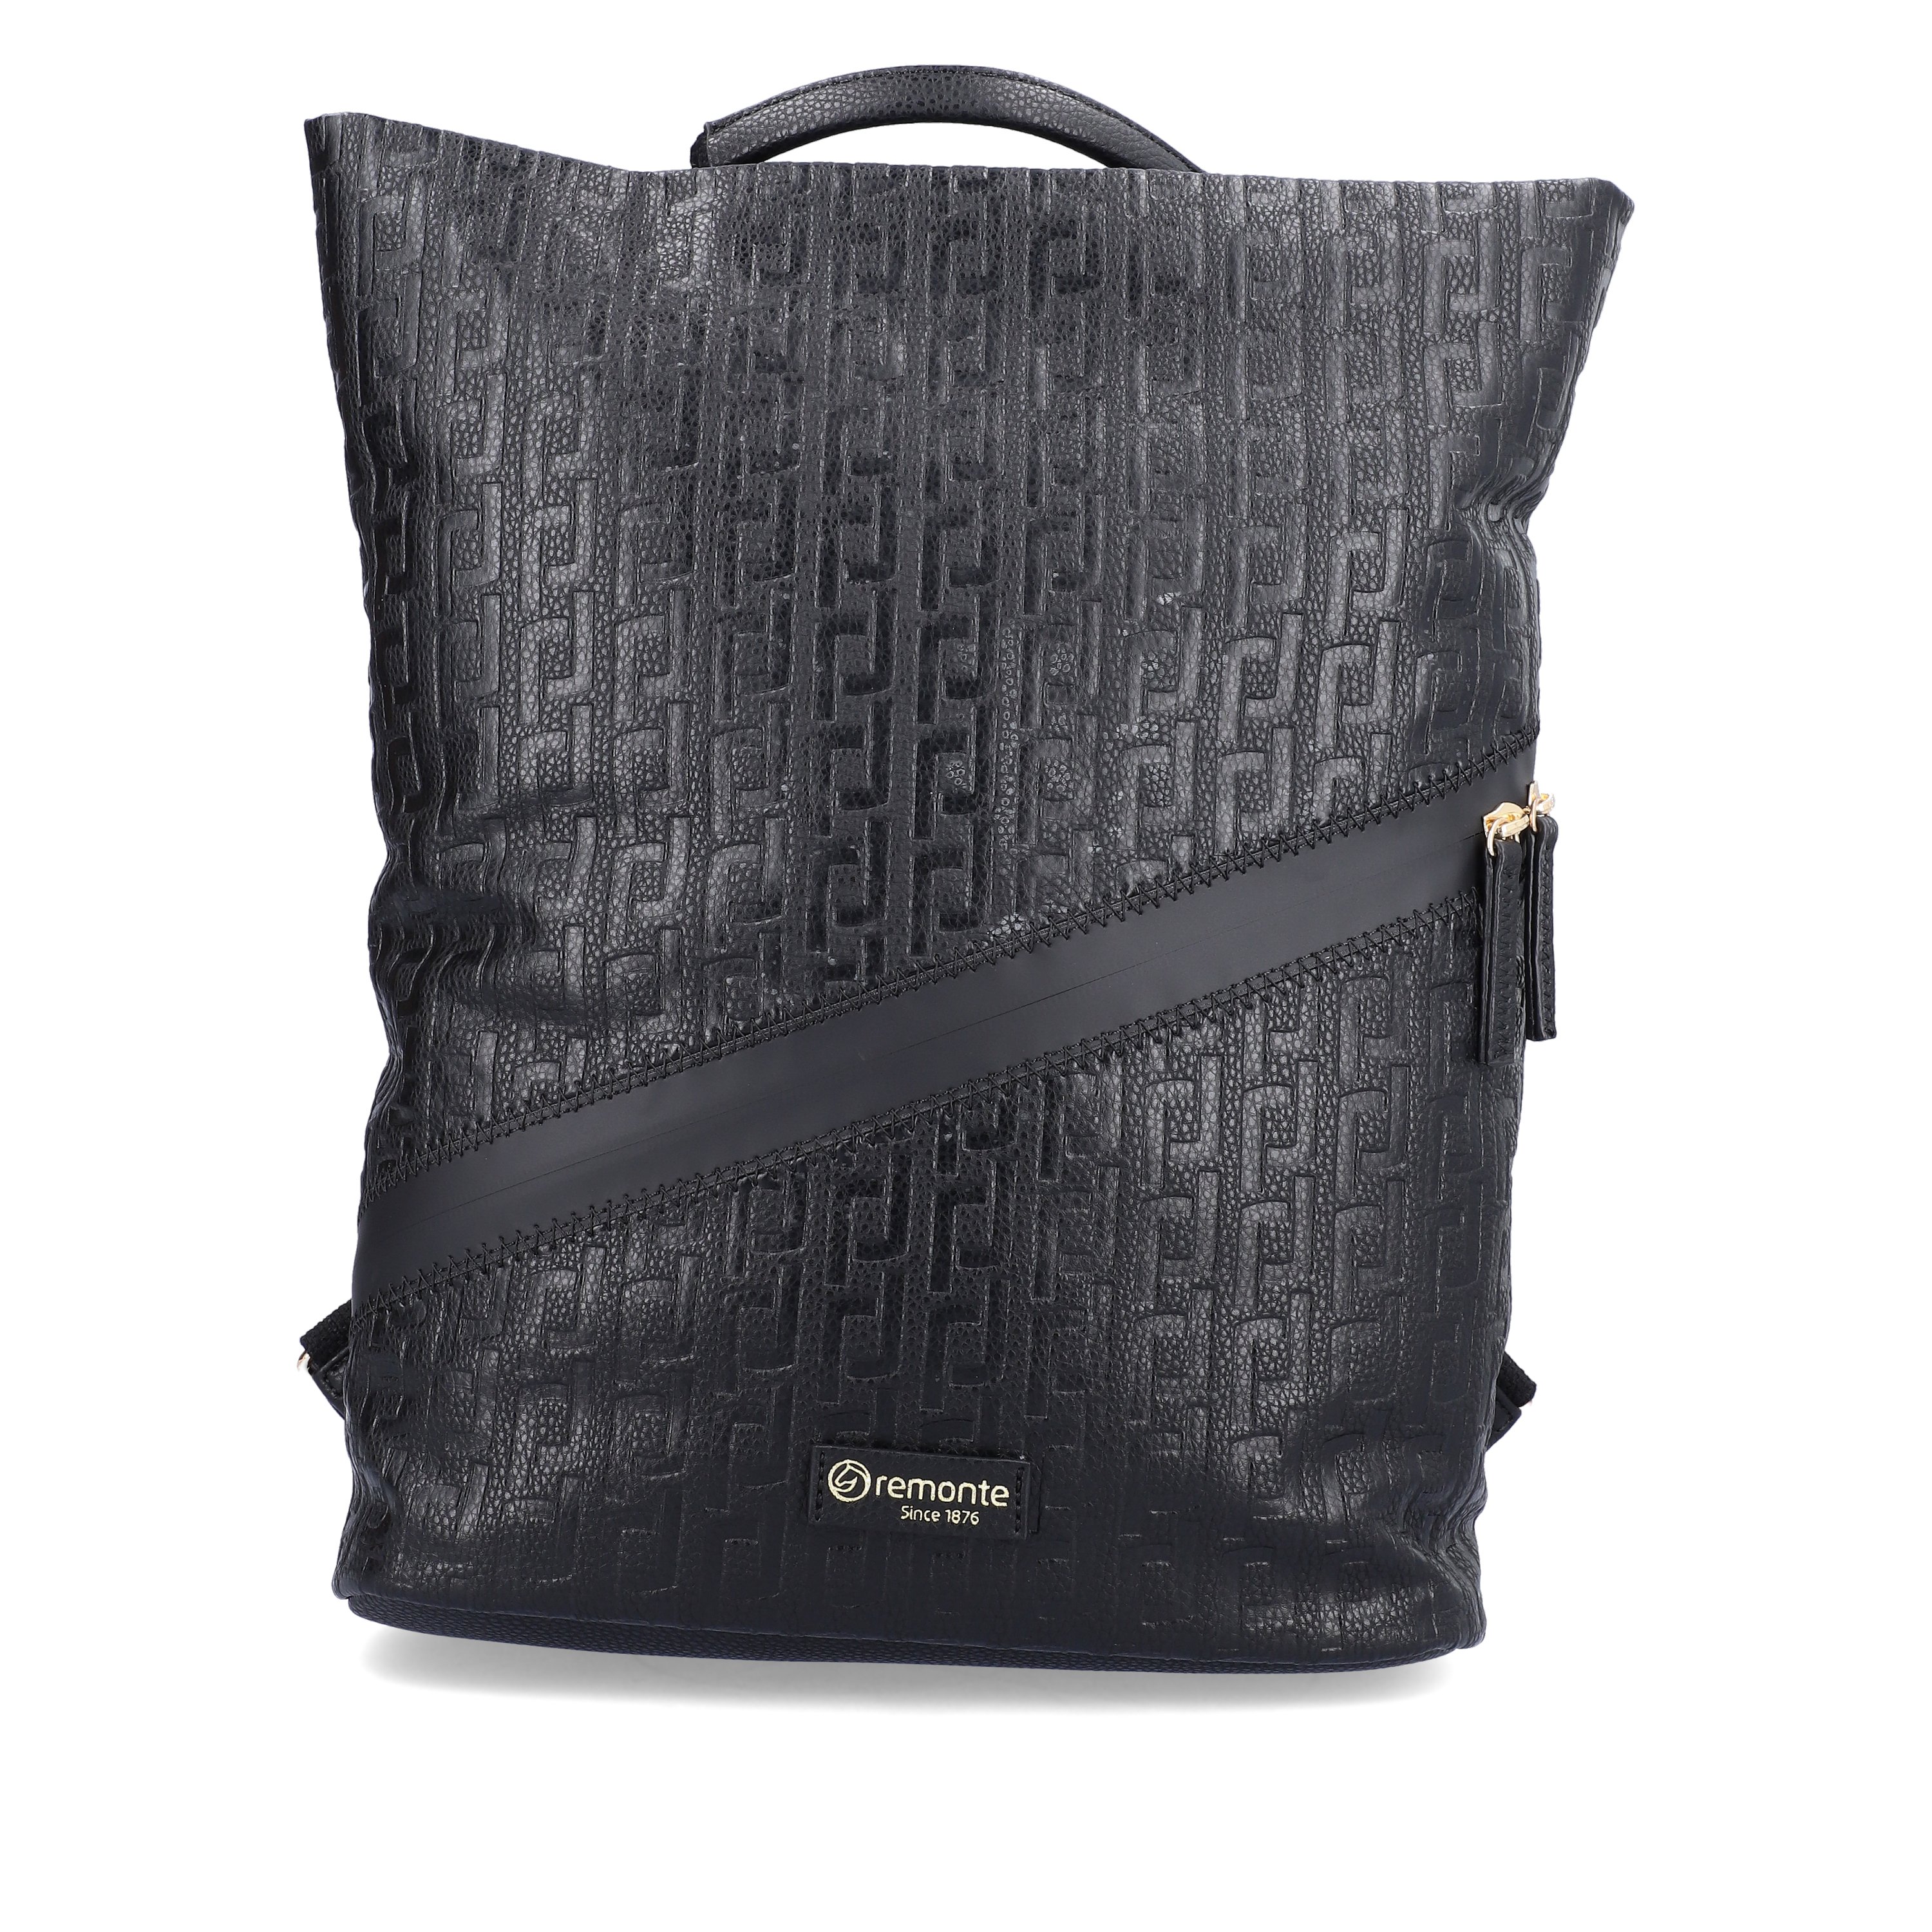 remonte women´s backpack Q0525-00 in black made of imitation leather with zipper from the front.